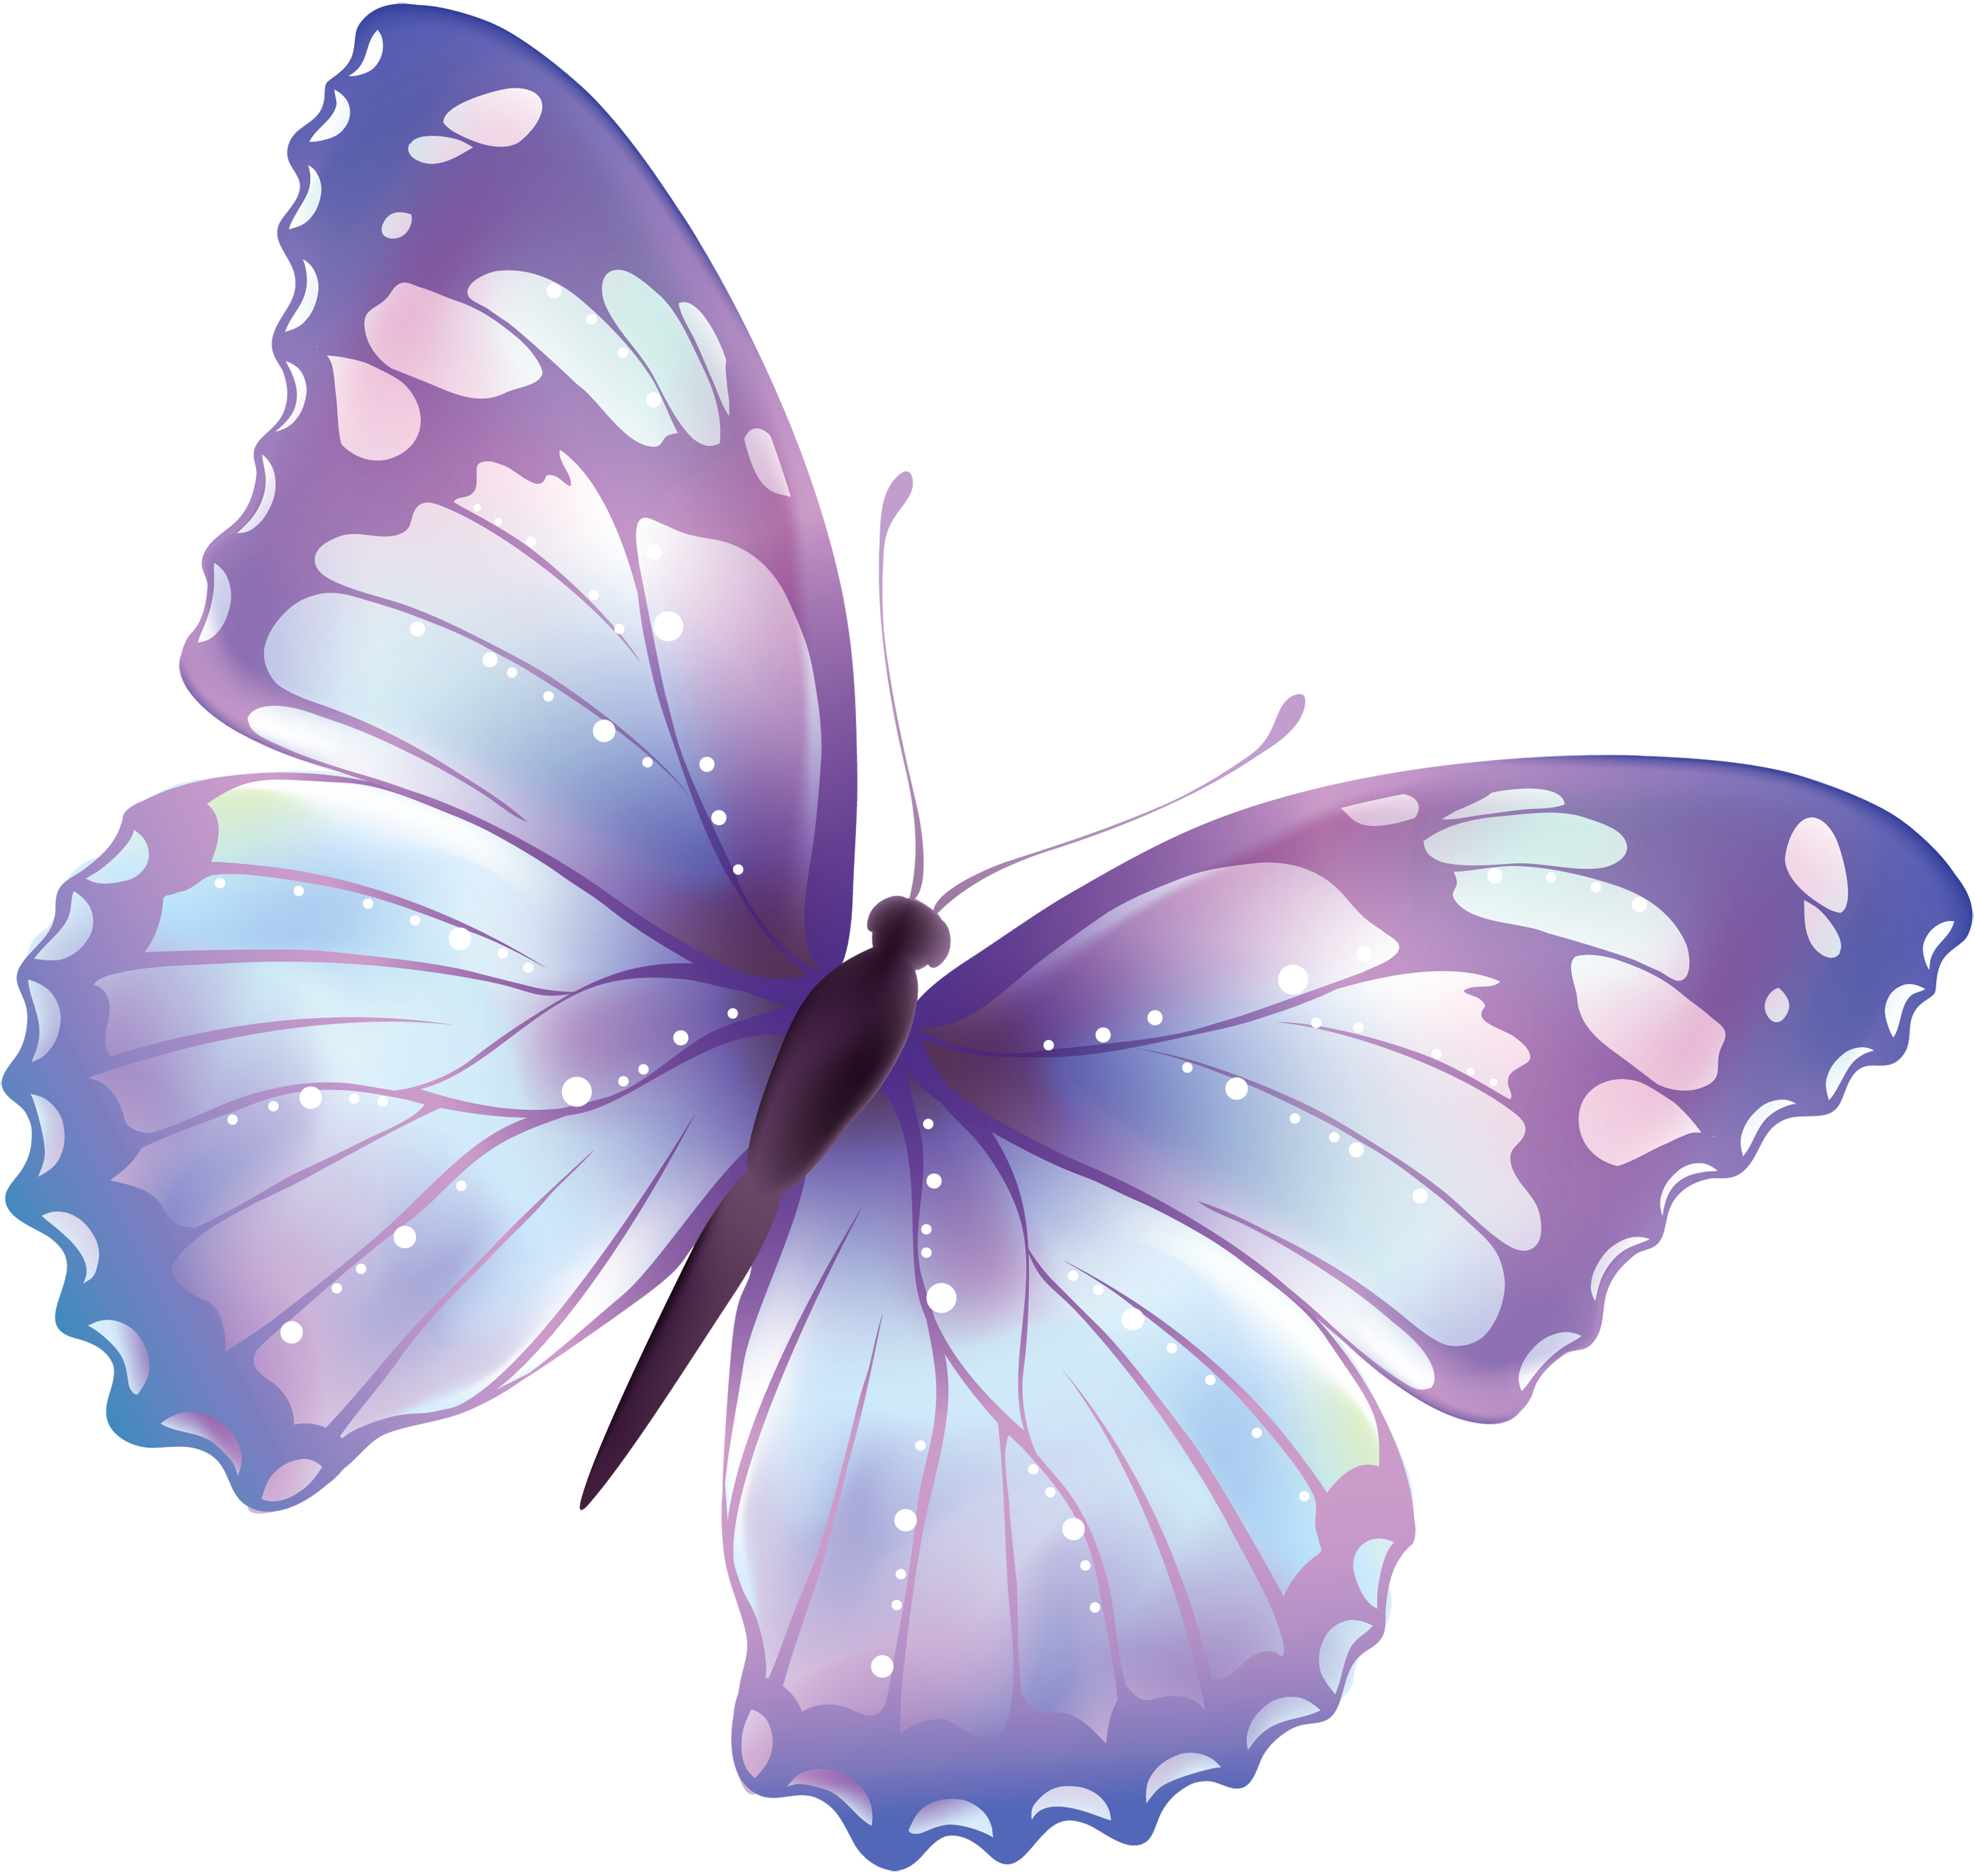 Butterfly PNG Transparent Images - PNG All